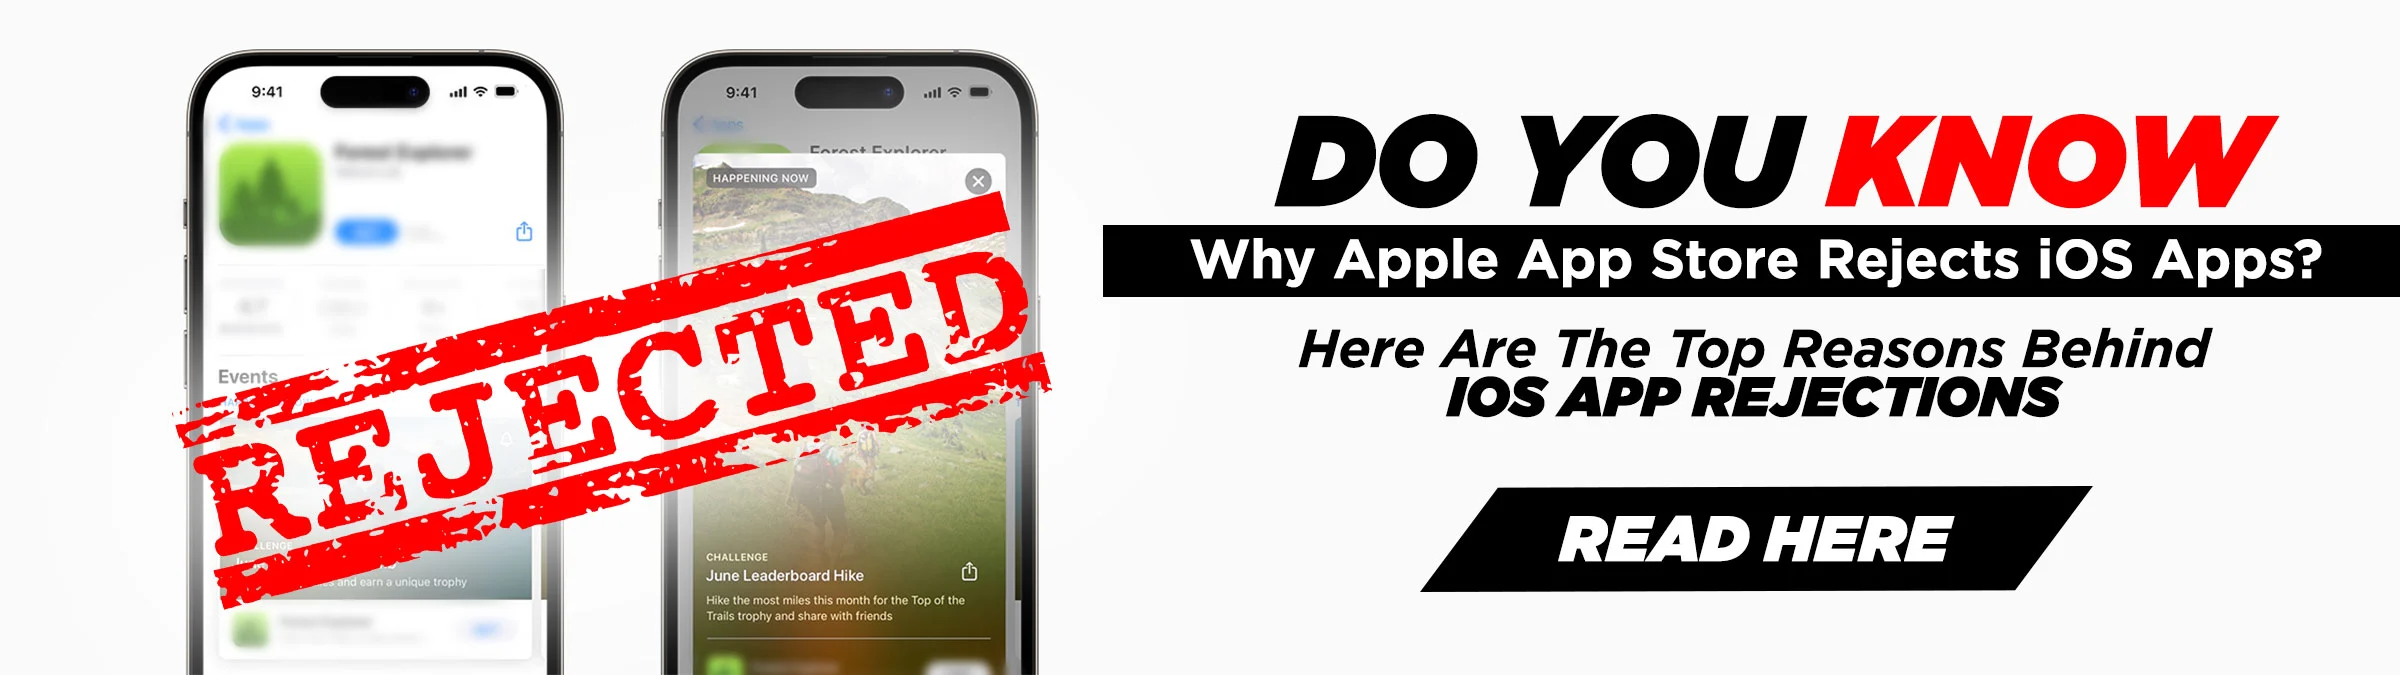 Do-You-Know-Why-Apple-App-Store-Rejects-iOS-Apps--Here-Are-The-Top-Reasons-Behind-iOS-App-Rejections-